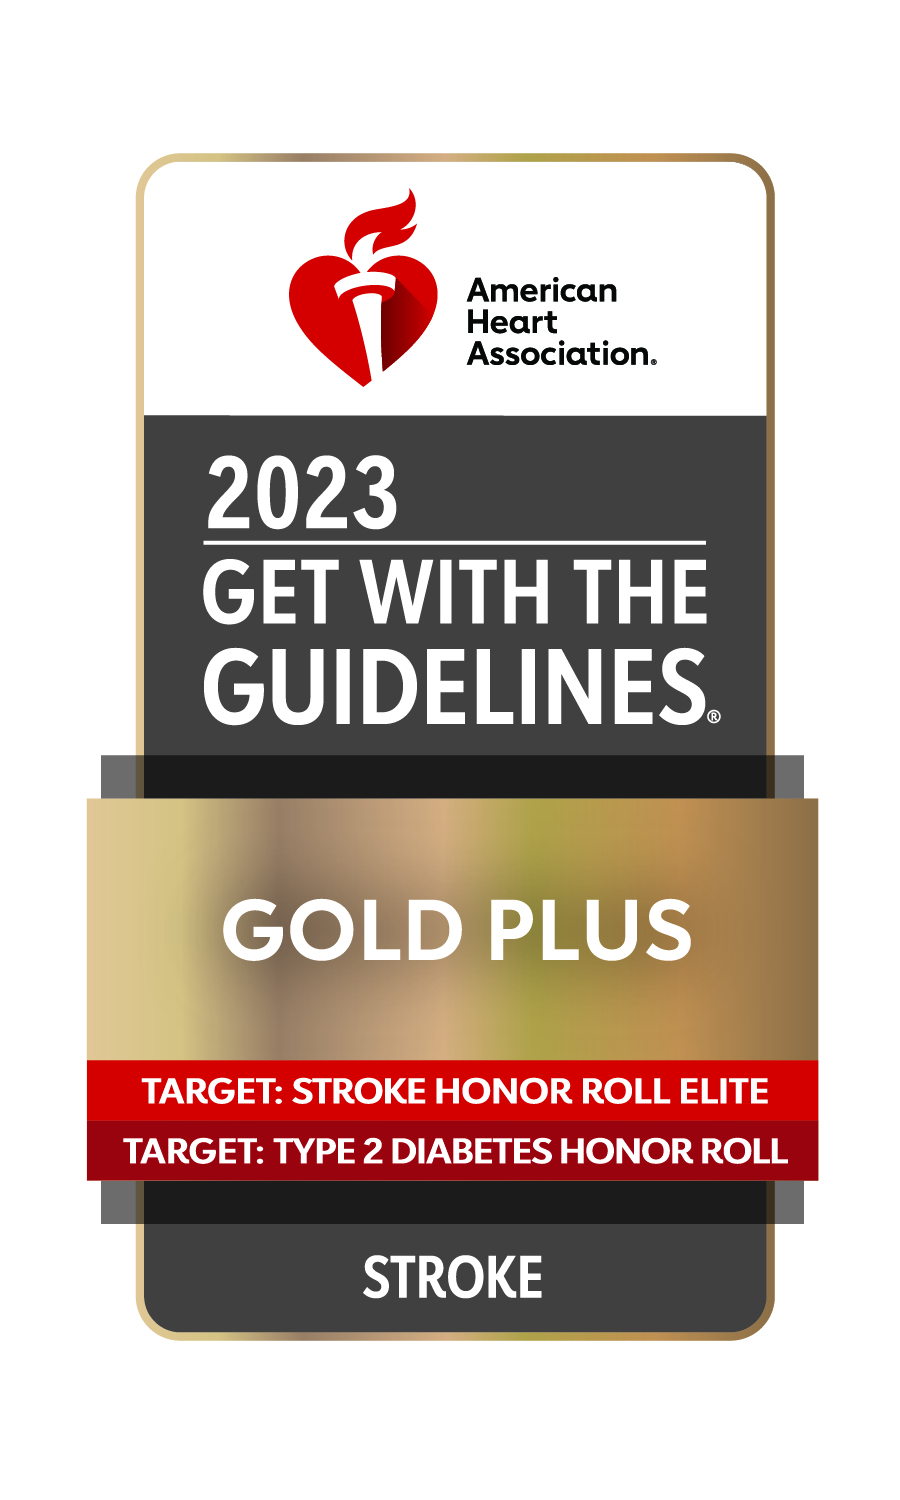 2023 Get with the Guidelines Gold Plus Stroke award